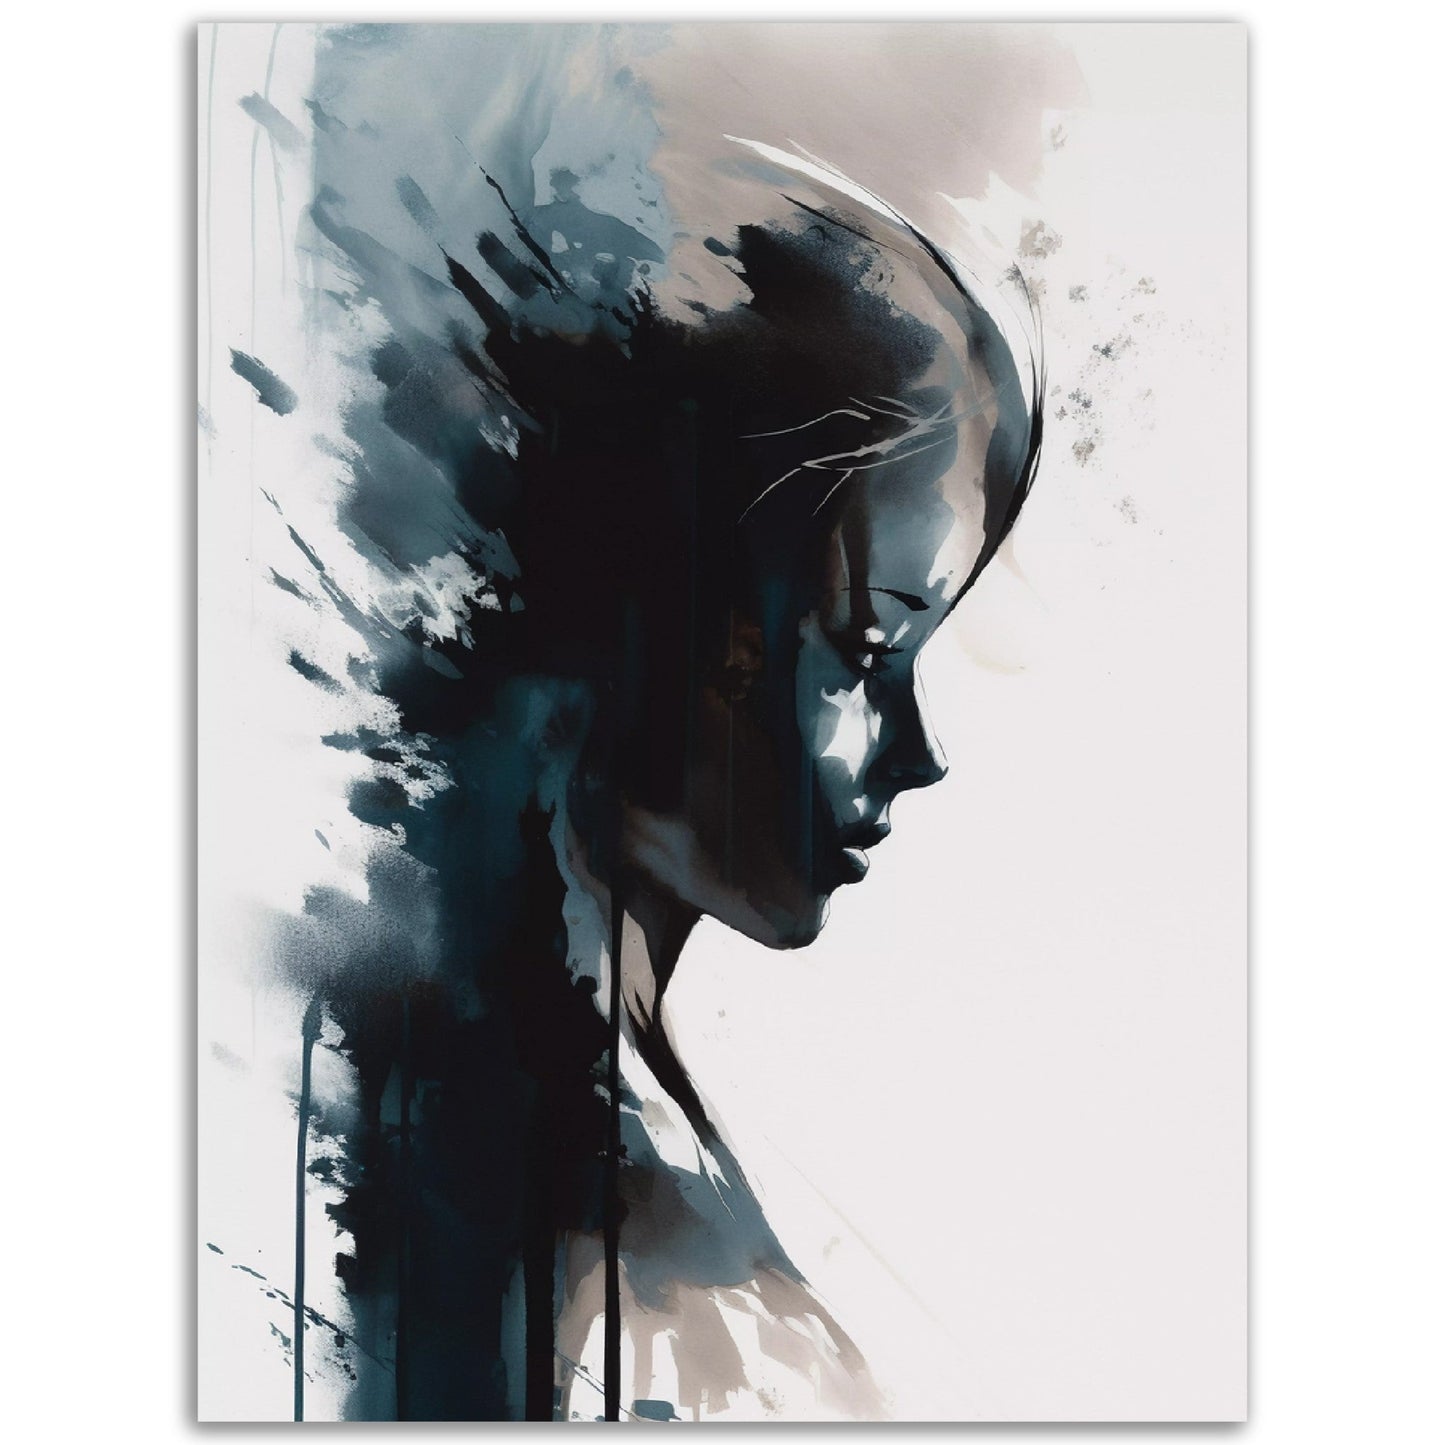 An Abstract Art painting of a woman's face, perfect for high-quality posters and wall art in any room, Passing Yourself.